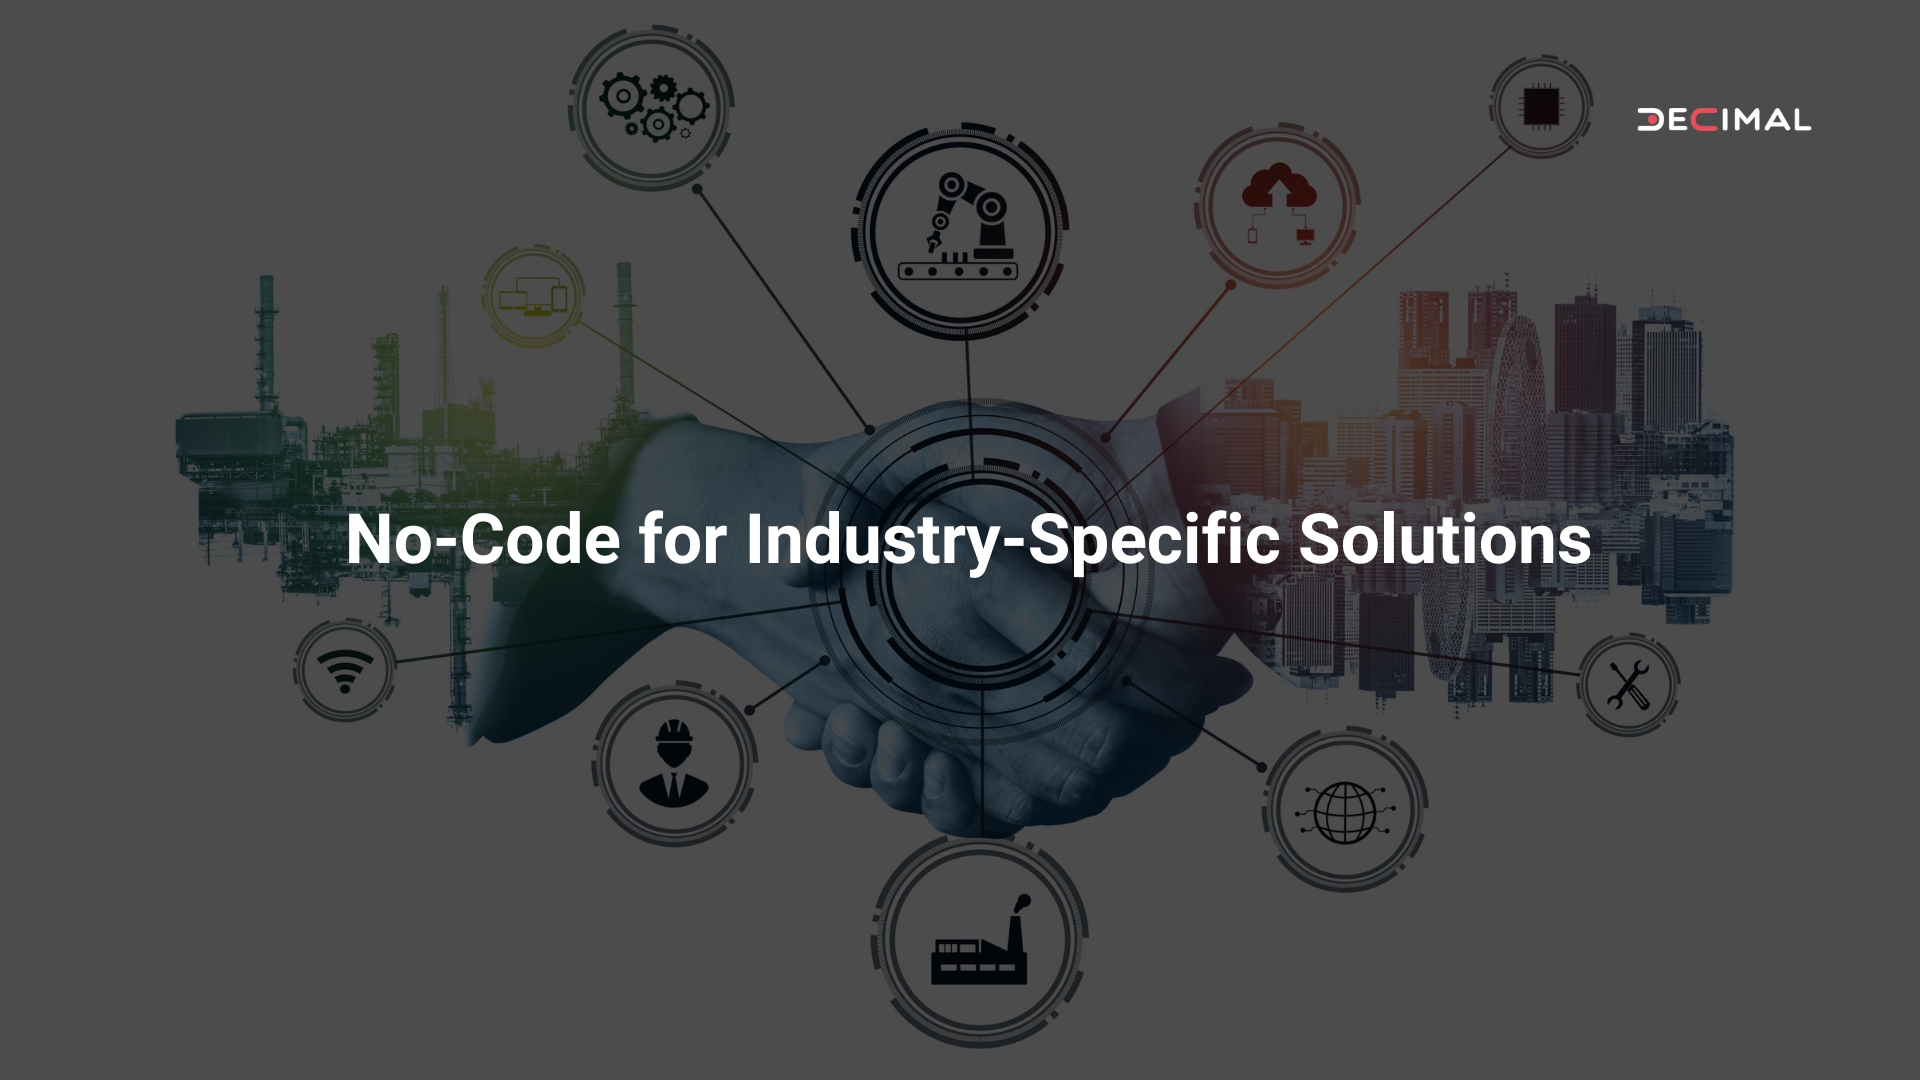 Benefits of No-code Industry-Specific Solutions